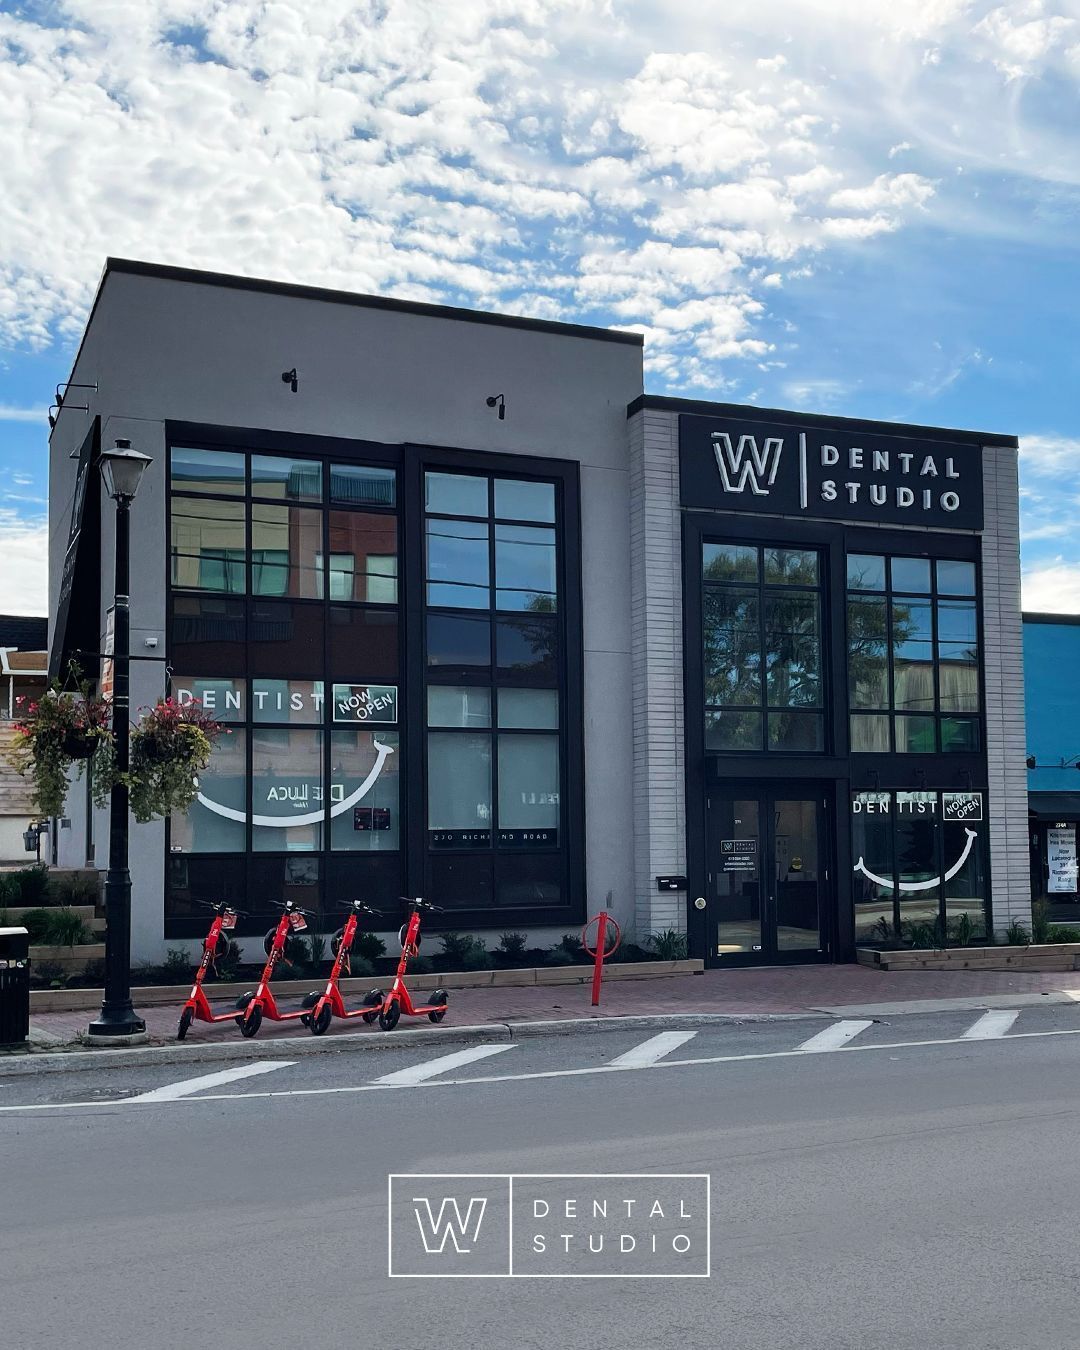 Have you visited our office yet? It's located at 270 Richmond Rd. in Ottawa! 

We love being in the Westboro neighbourhood. You can enjoy tree-lined streets, shop in one-of-a-kind boutiques and dine at Ottawa’s trendiest spots 😍
⠀
We are accepting new clients, contact us: 

📱613-564-3300
📧 info@wdentalstudio.com